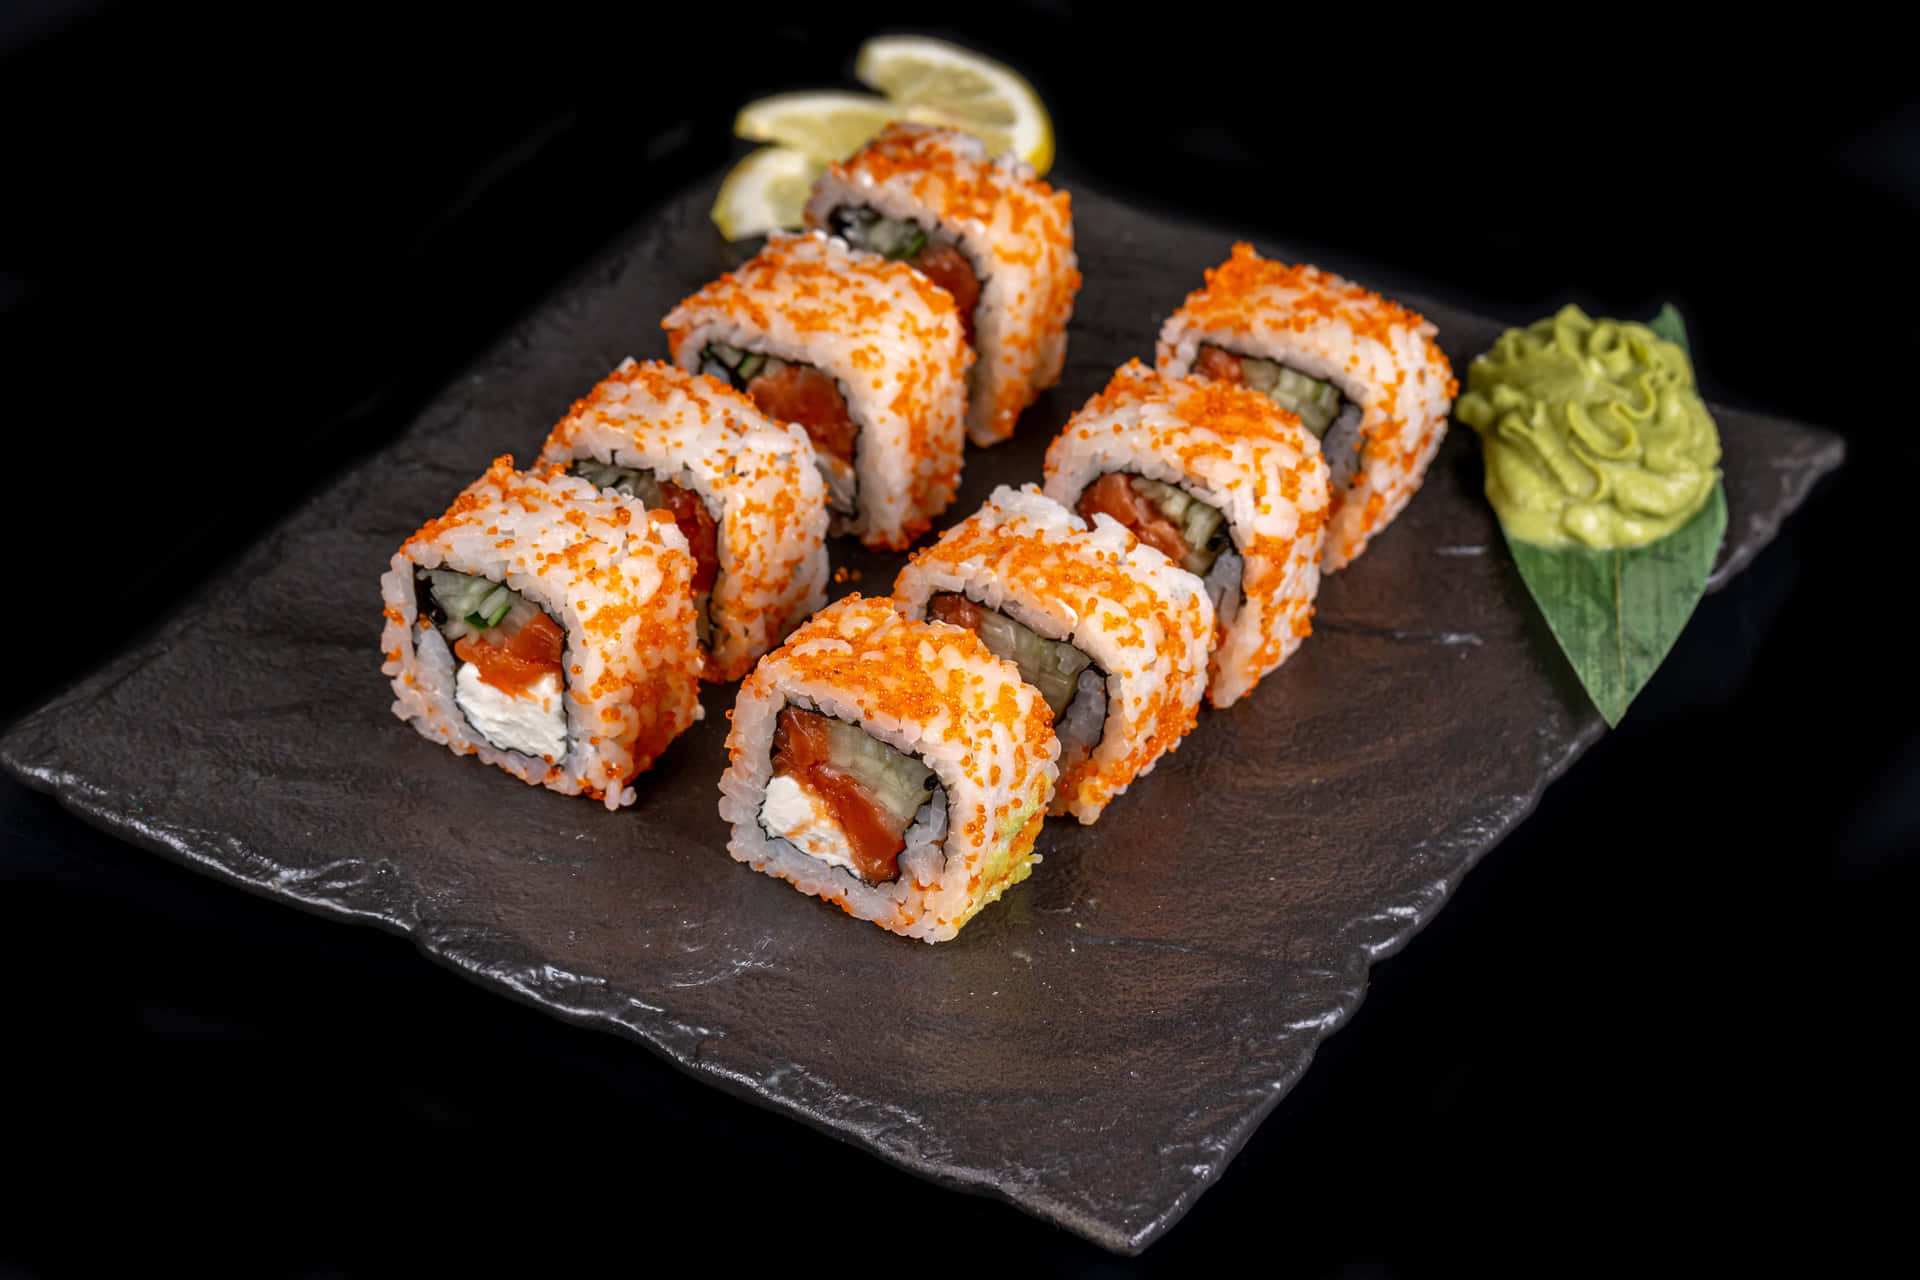 Delicious sushi assortment on a stylish plate